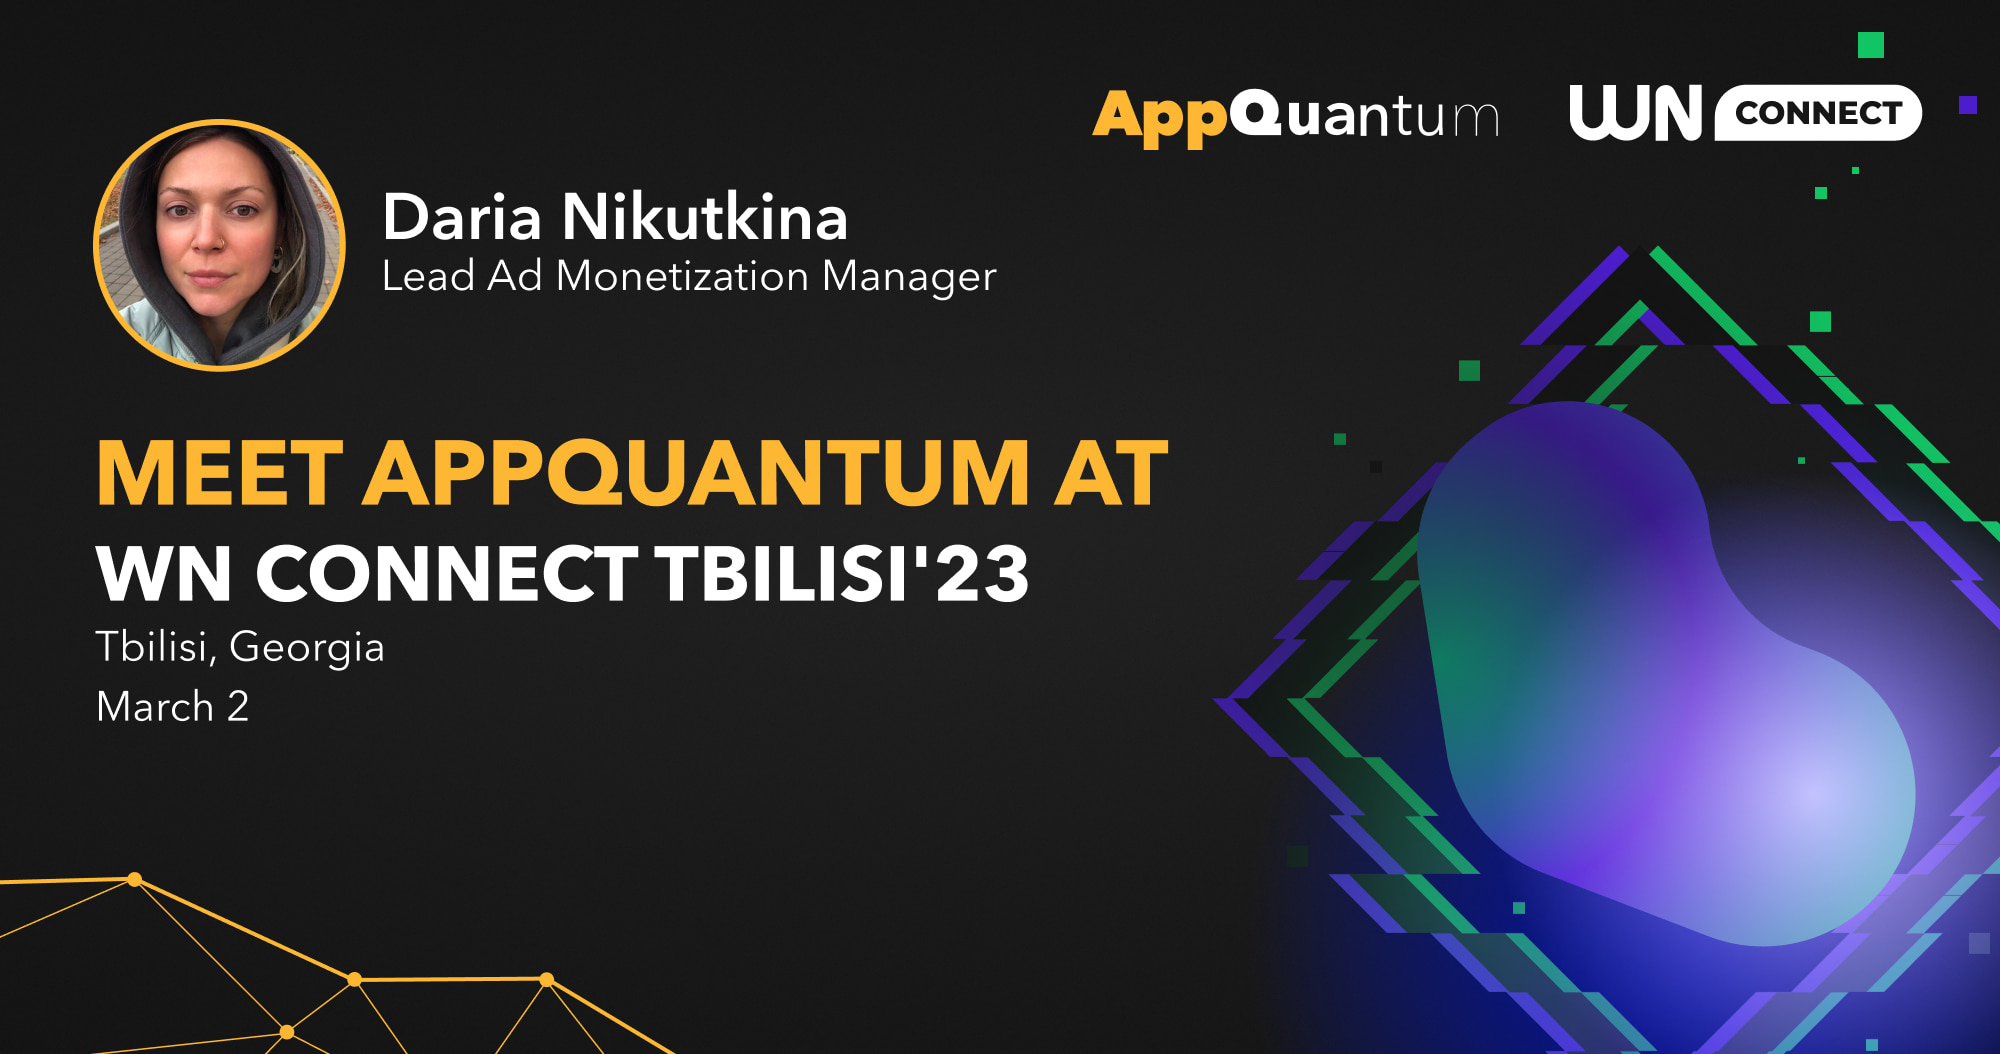 Meet AppQuantum at WN Connect Tbilisi'23!